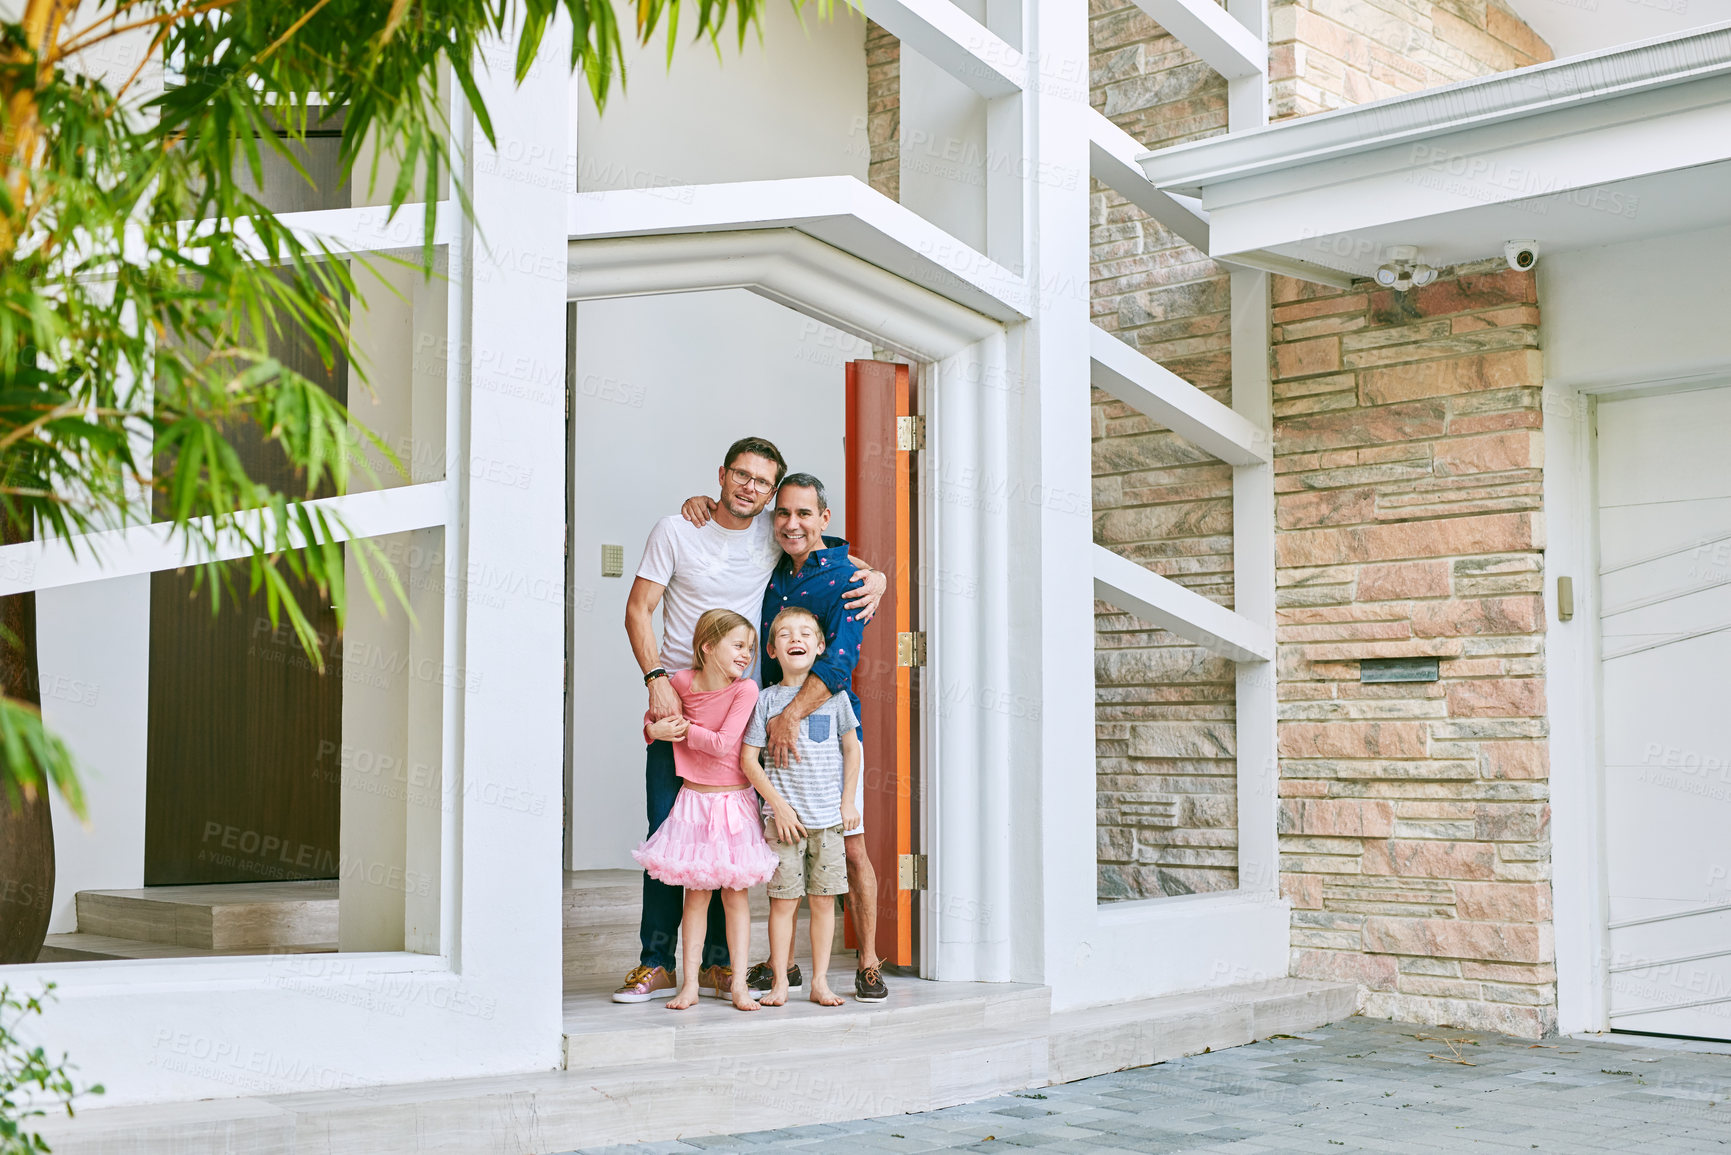 Buy stock photo Full length portrait of an affectionate family of four standing in the doorway to their home